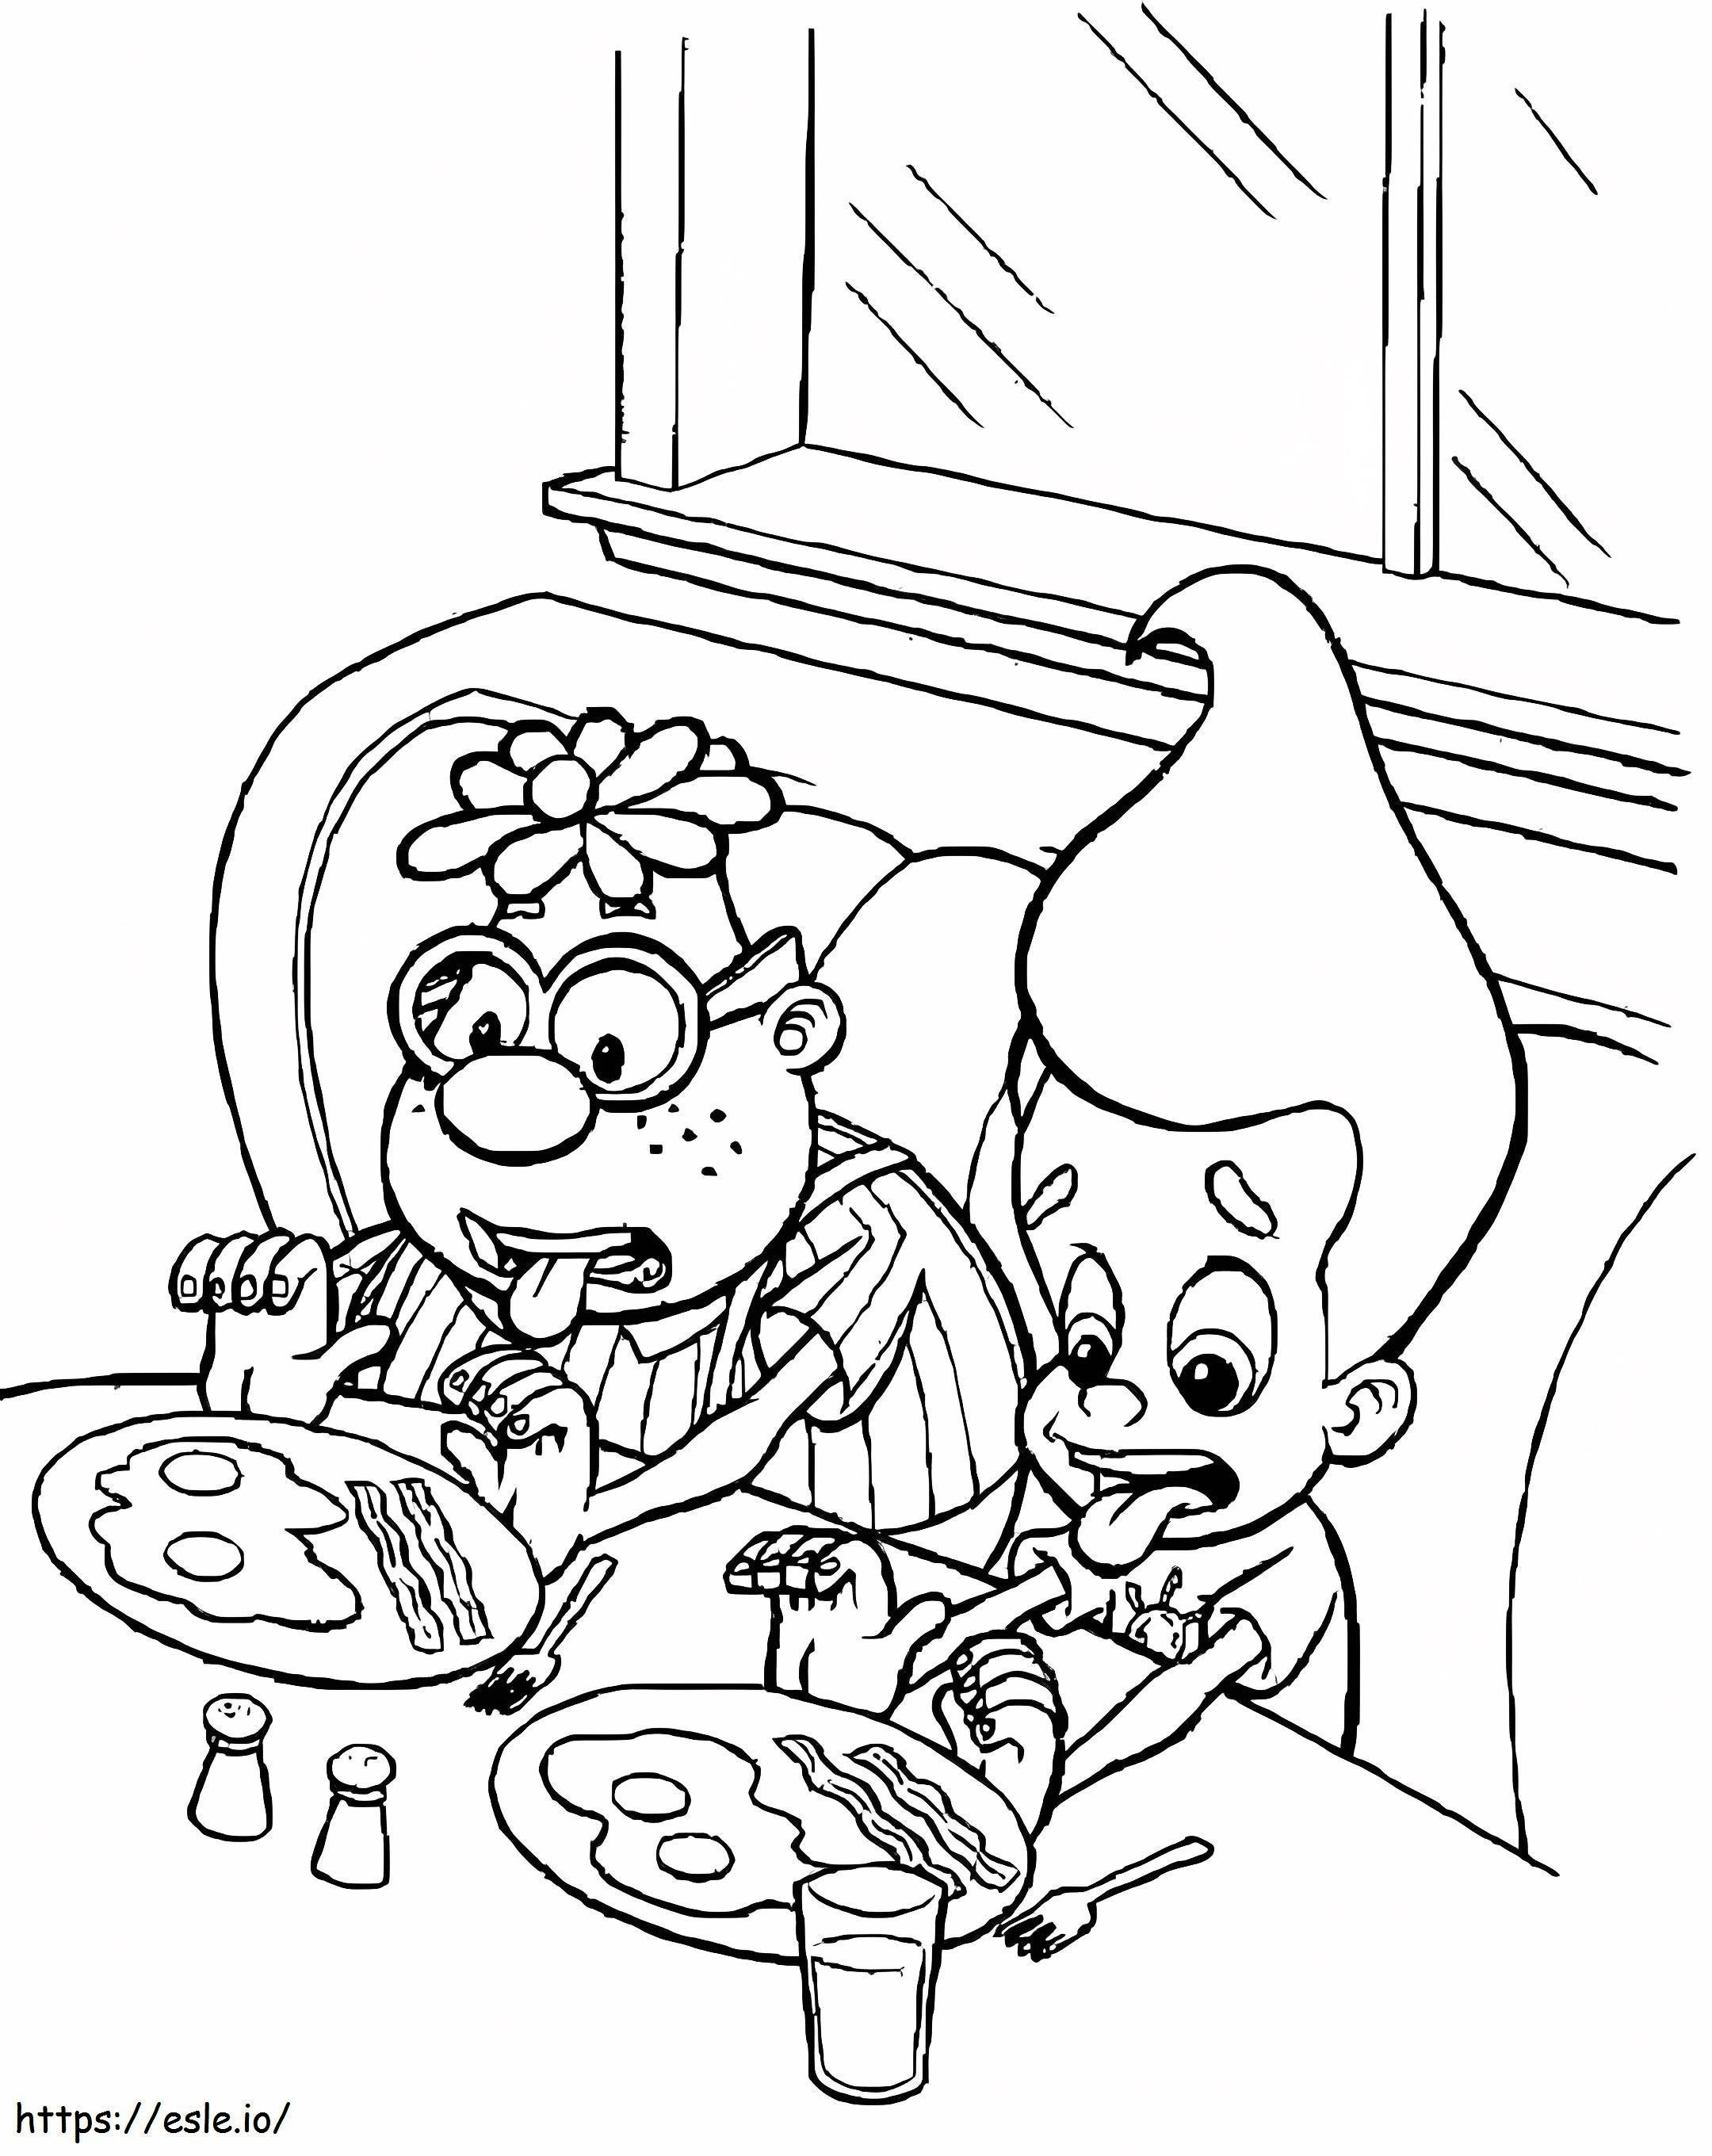 Carl Wheezer And Jimmy Neutron coloring page